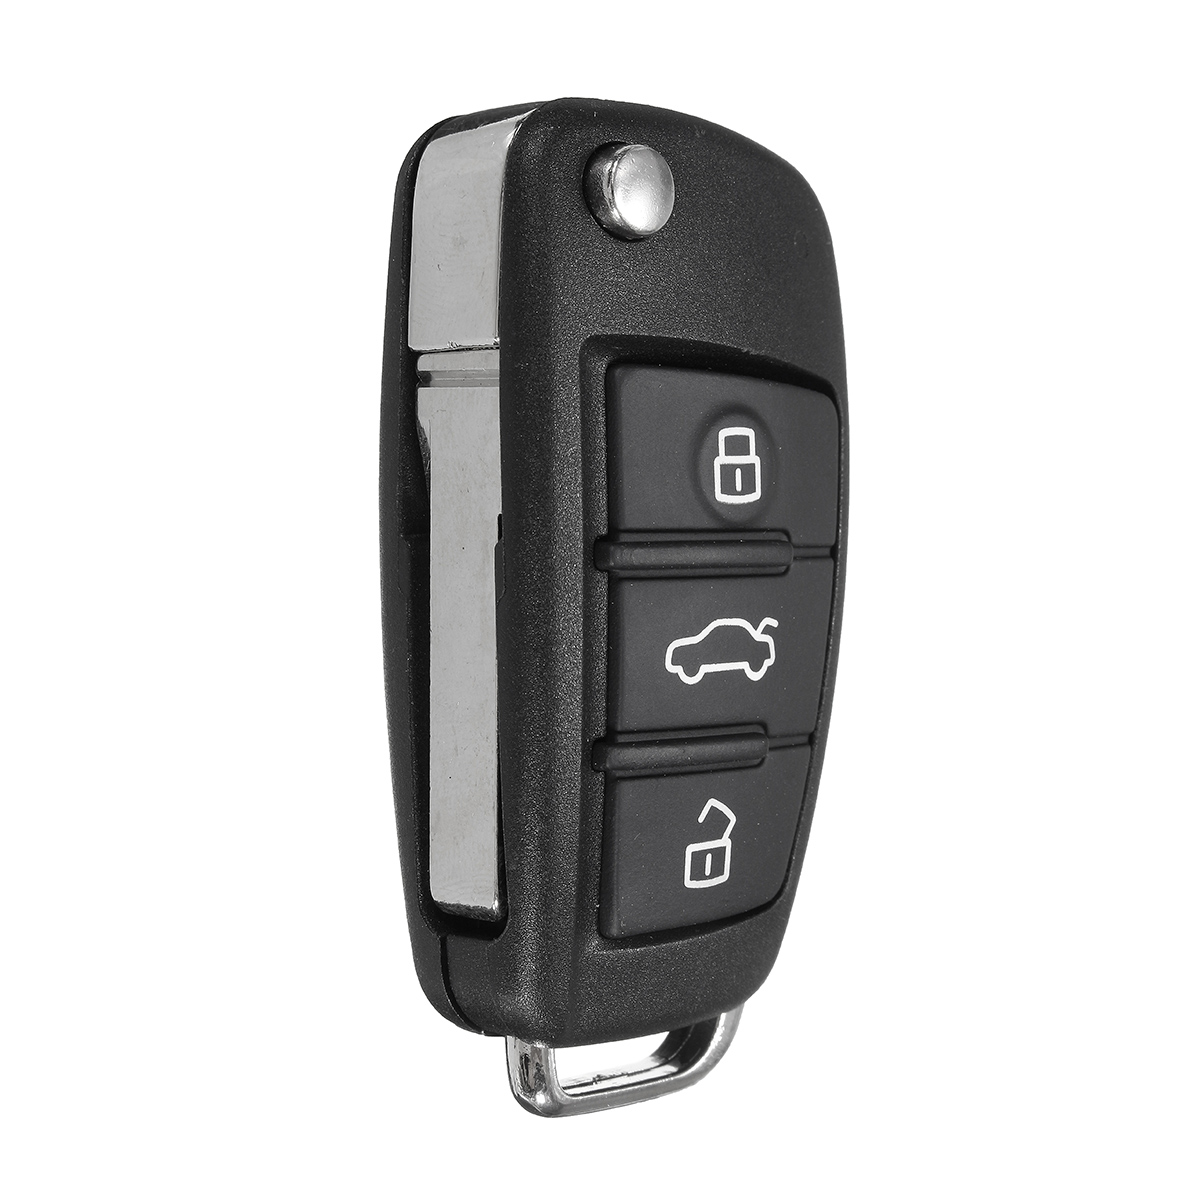 New 3+1 Buttons Remote Key Fob Case Uncut Blade For Audi A6 A4 A2 A8 TT Q7 eBay